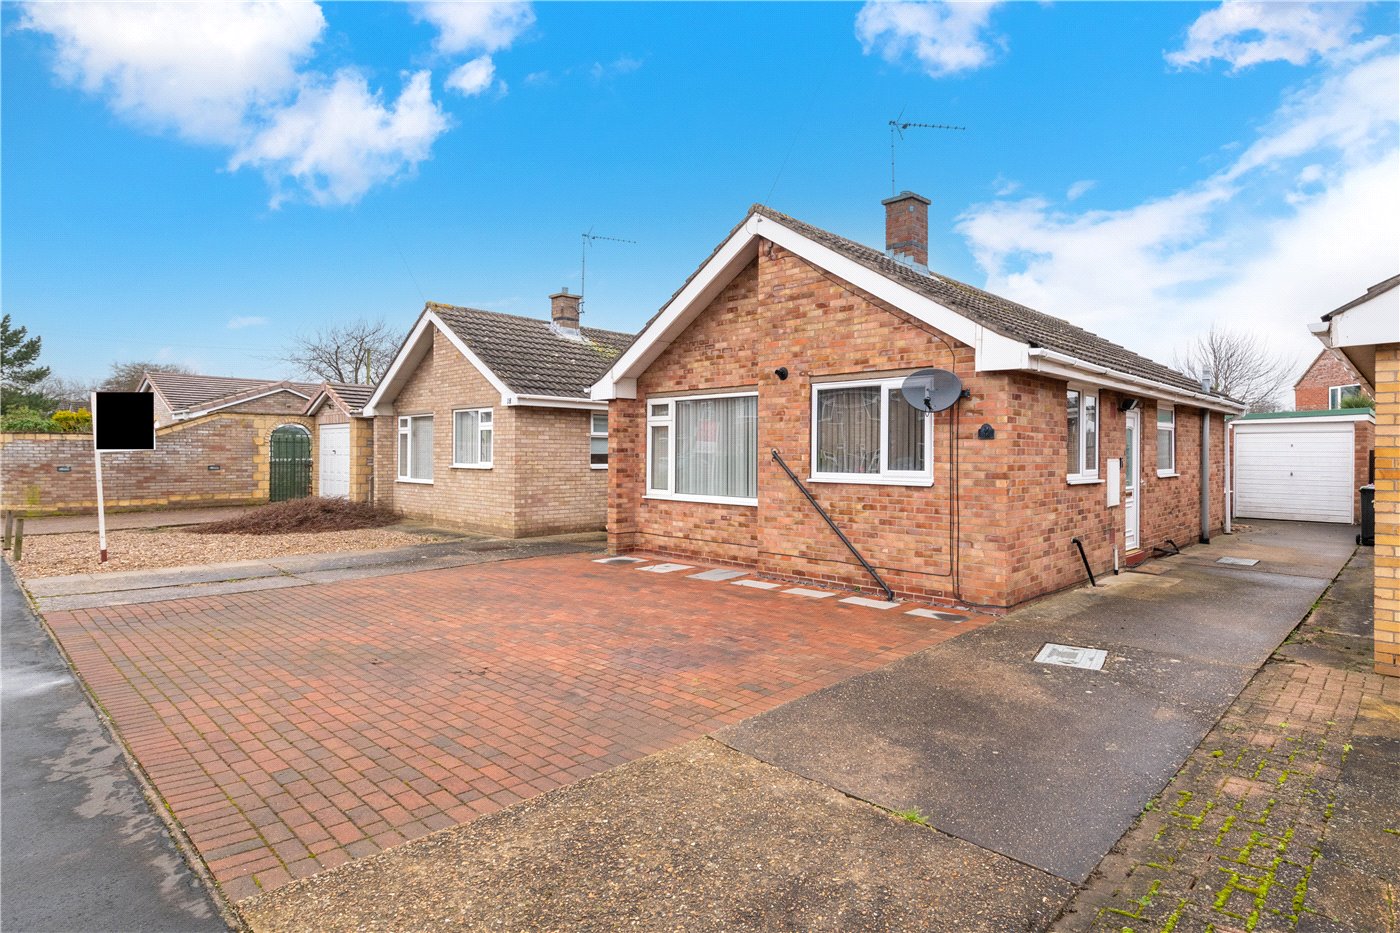 Stephens Way, Sleaford, Lincolnshire, NG34 2 bedroom bungalow in Sleaford